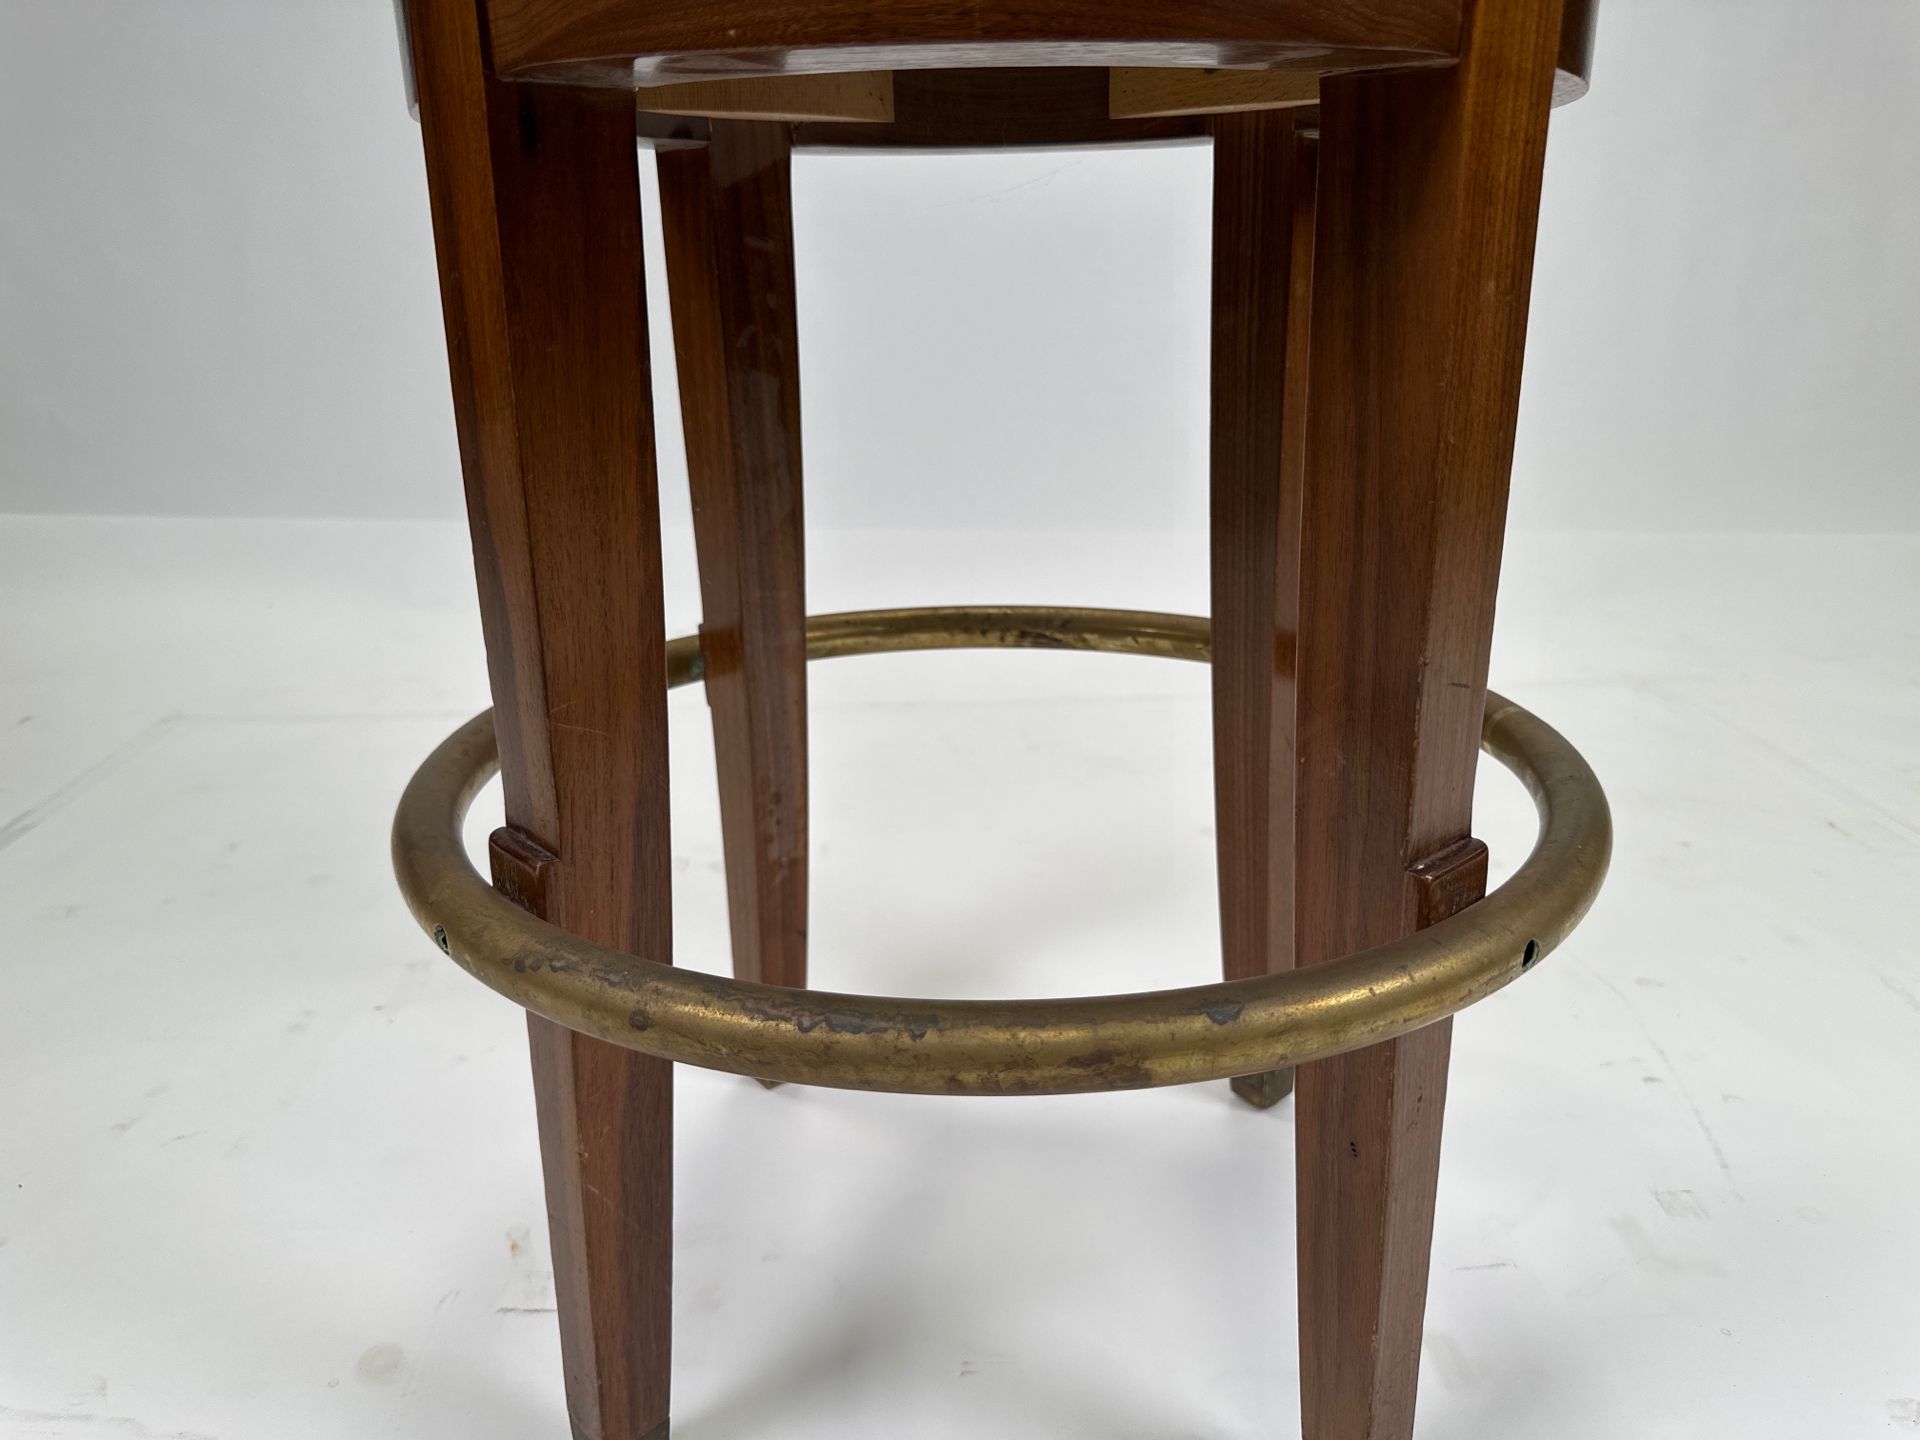 Leather & Brass Bar Stool - Image 5 of 6